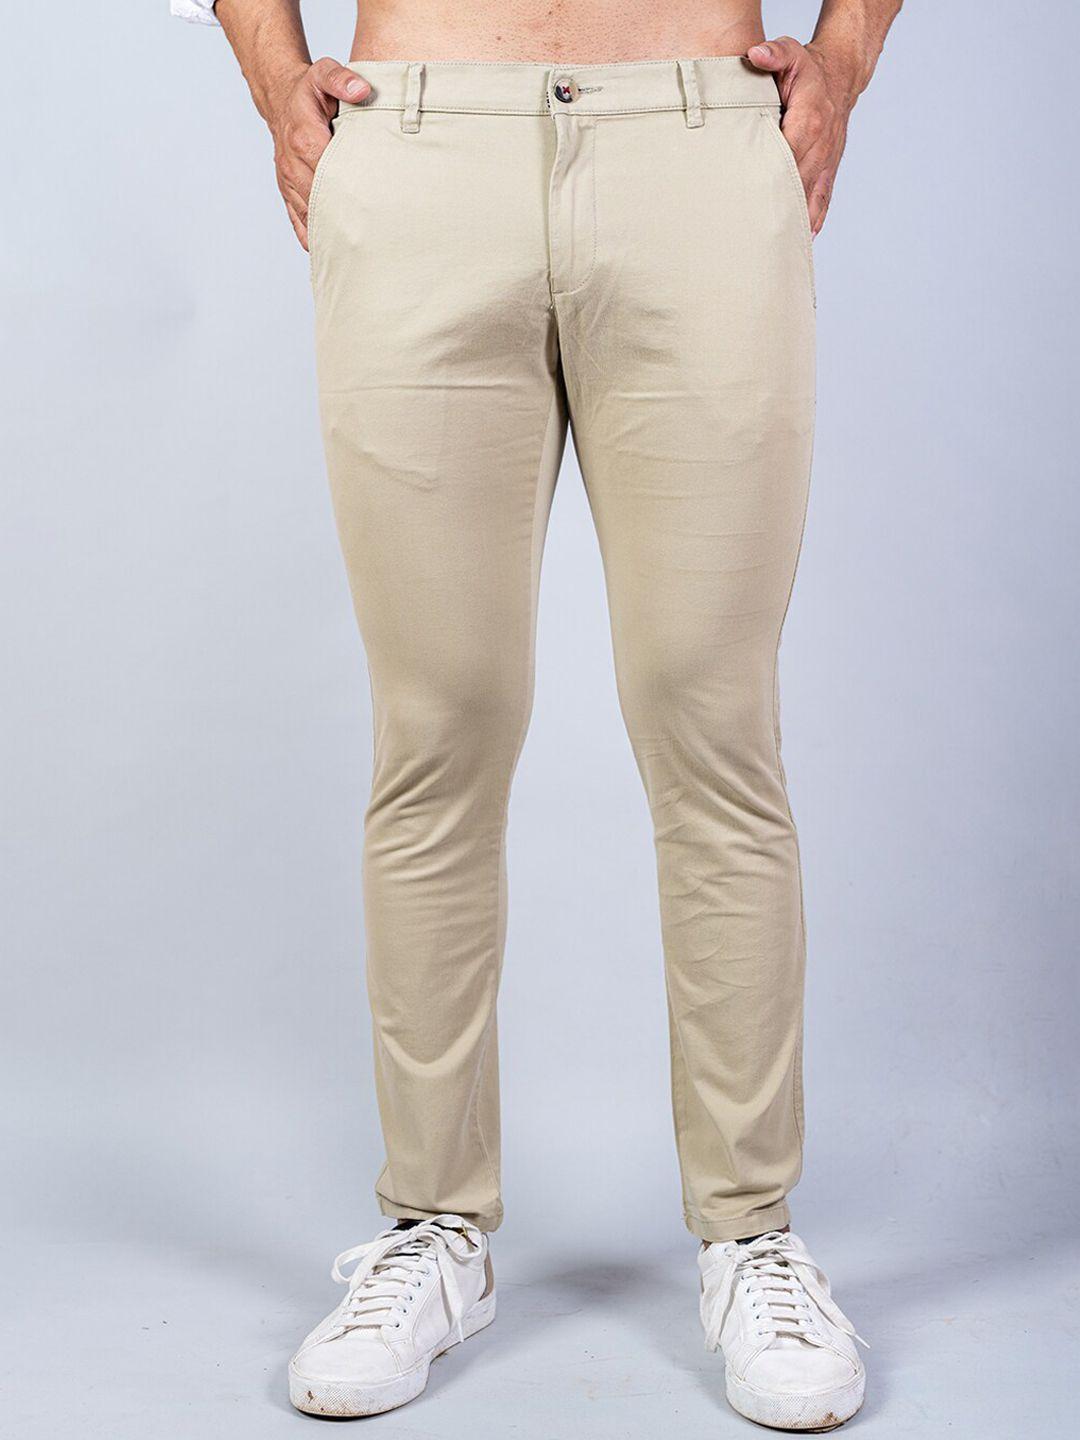 tistabene men beige relaxed cotton chinos trouser